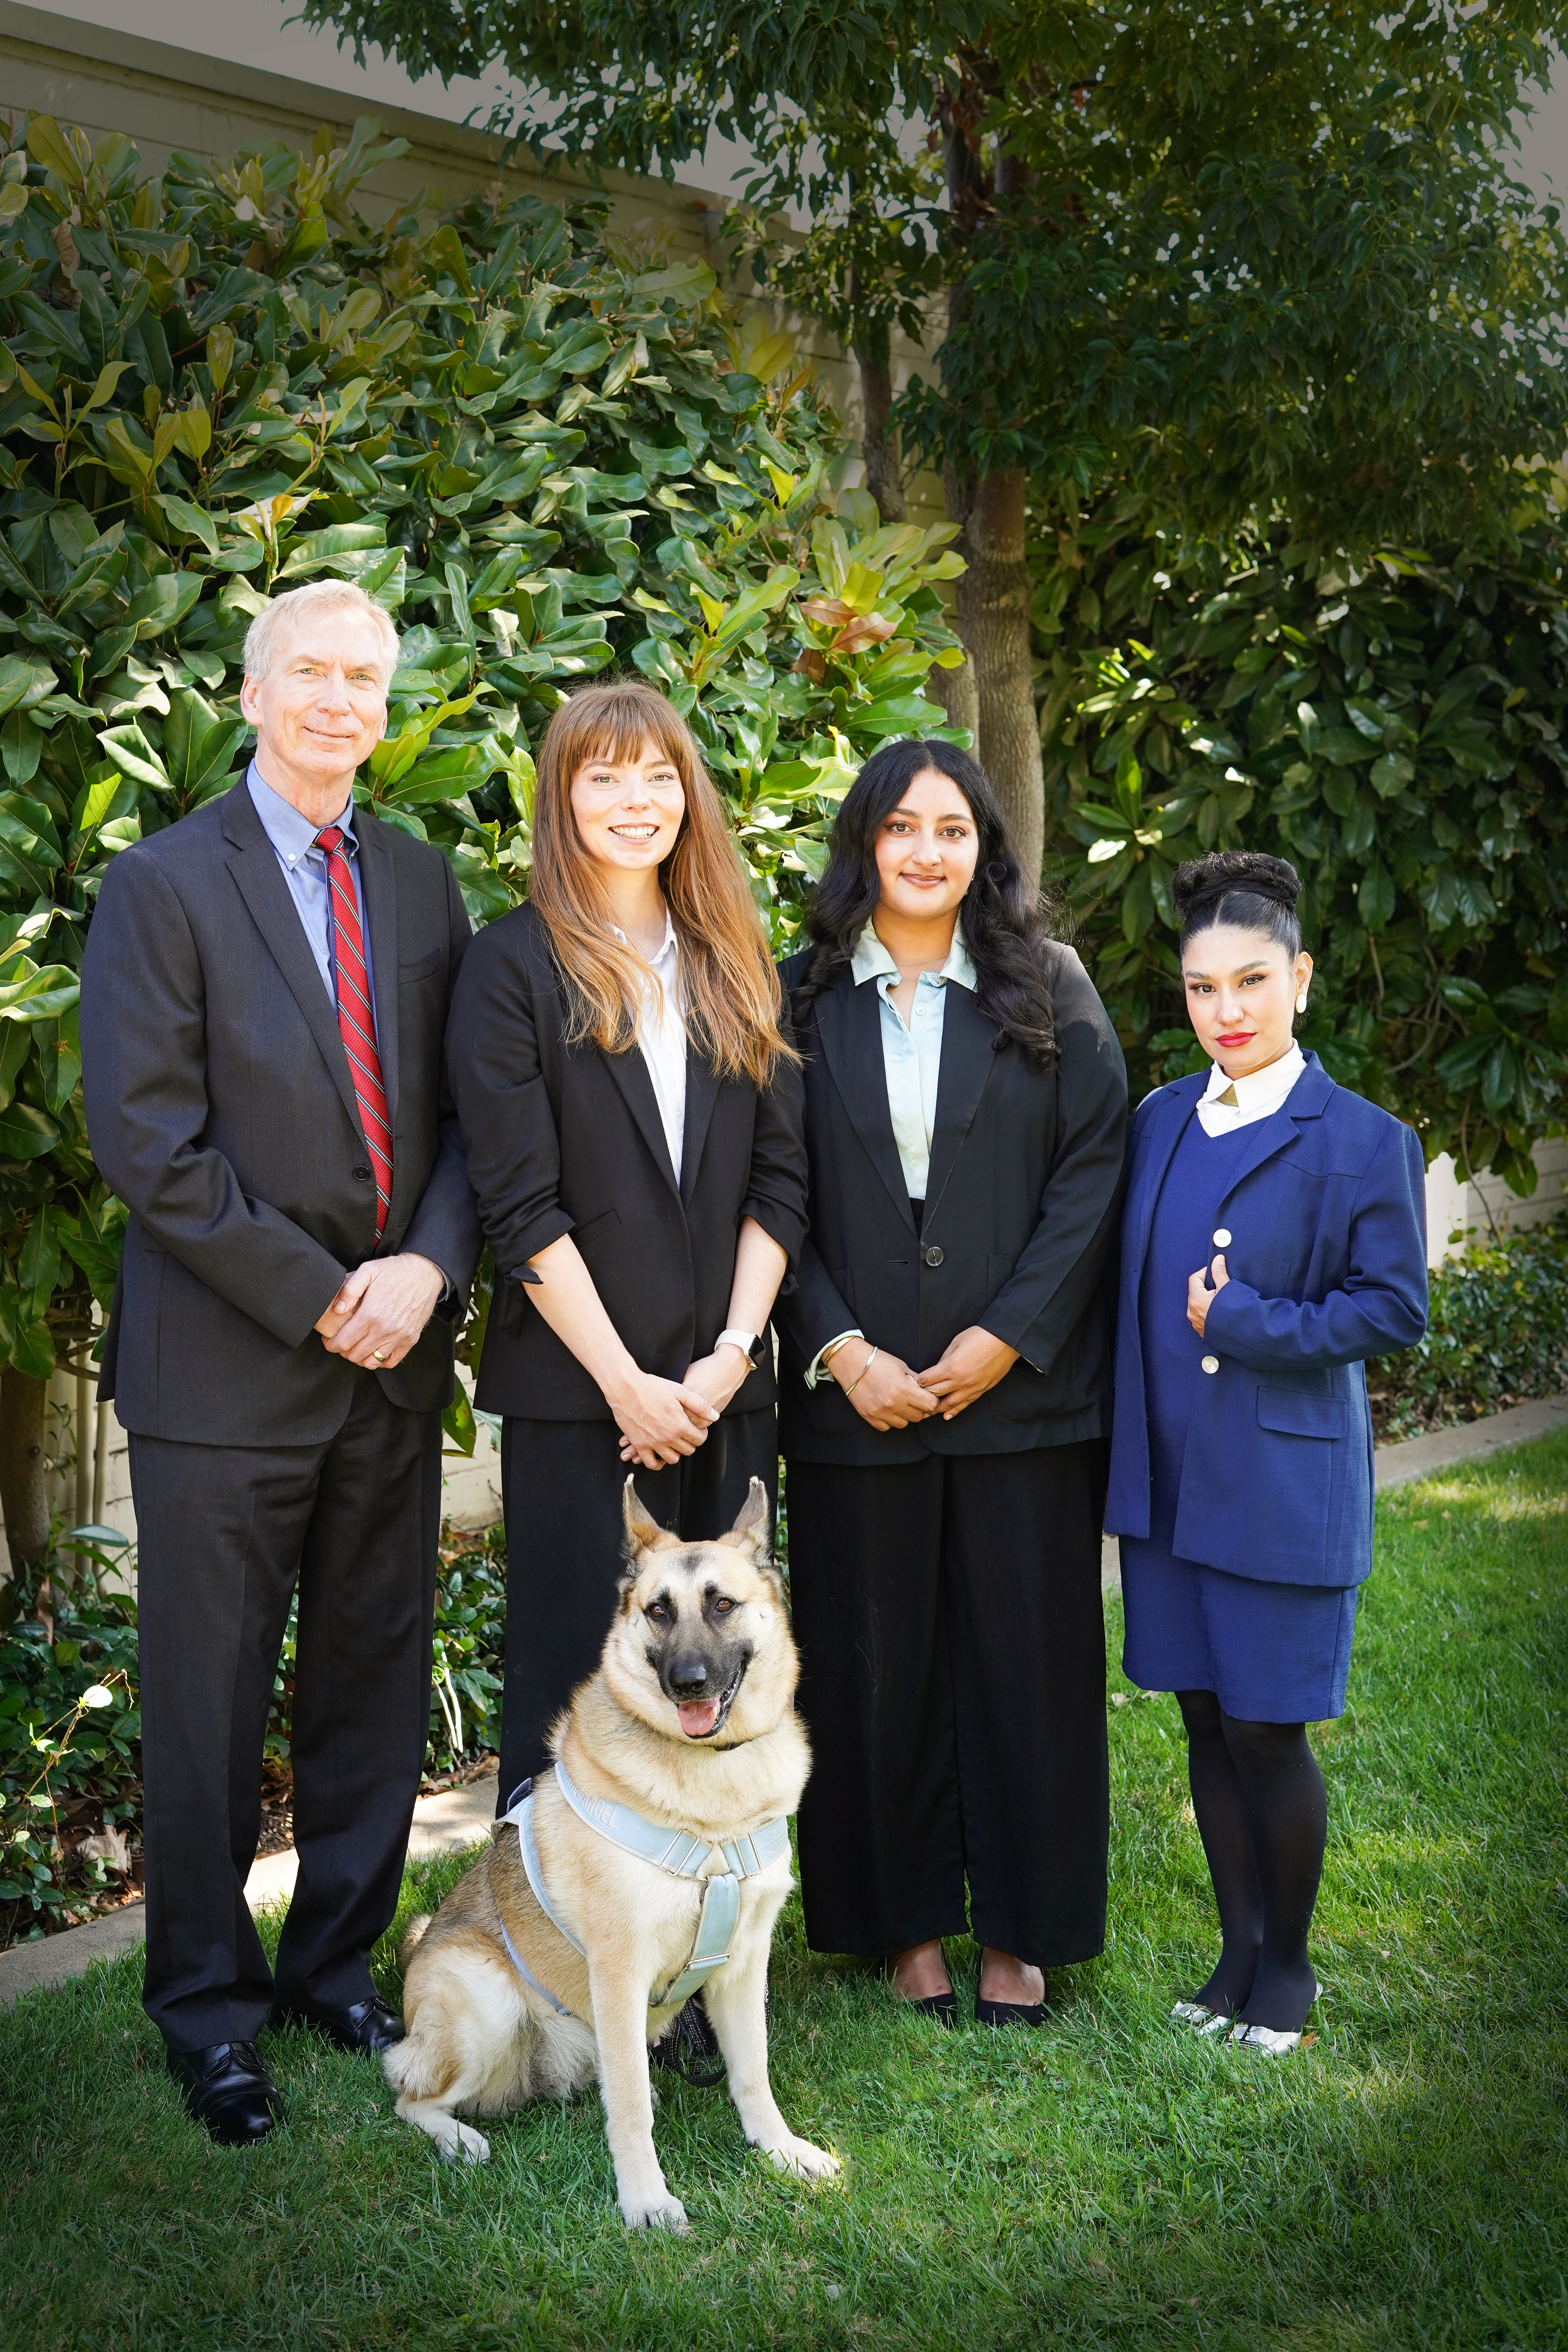 Our team at Bowman Law Practice